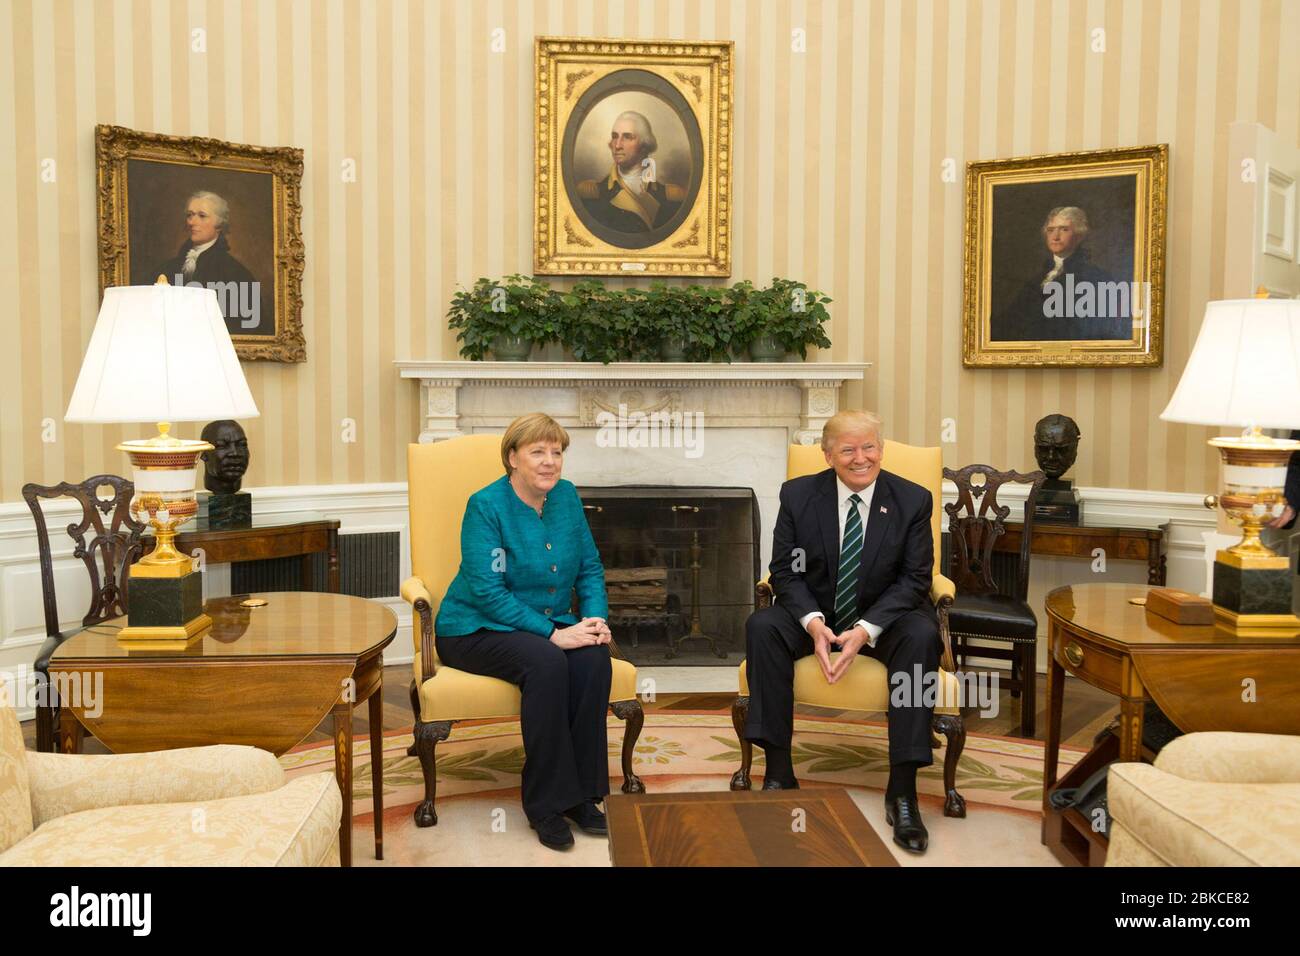 President Donald Trump meets with German Chancellor Angela Merkel, Friday, March 17, 2017, in the Oval Office of the White House in Washington, D.C. Foreign Leader Visits Stock Photo